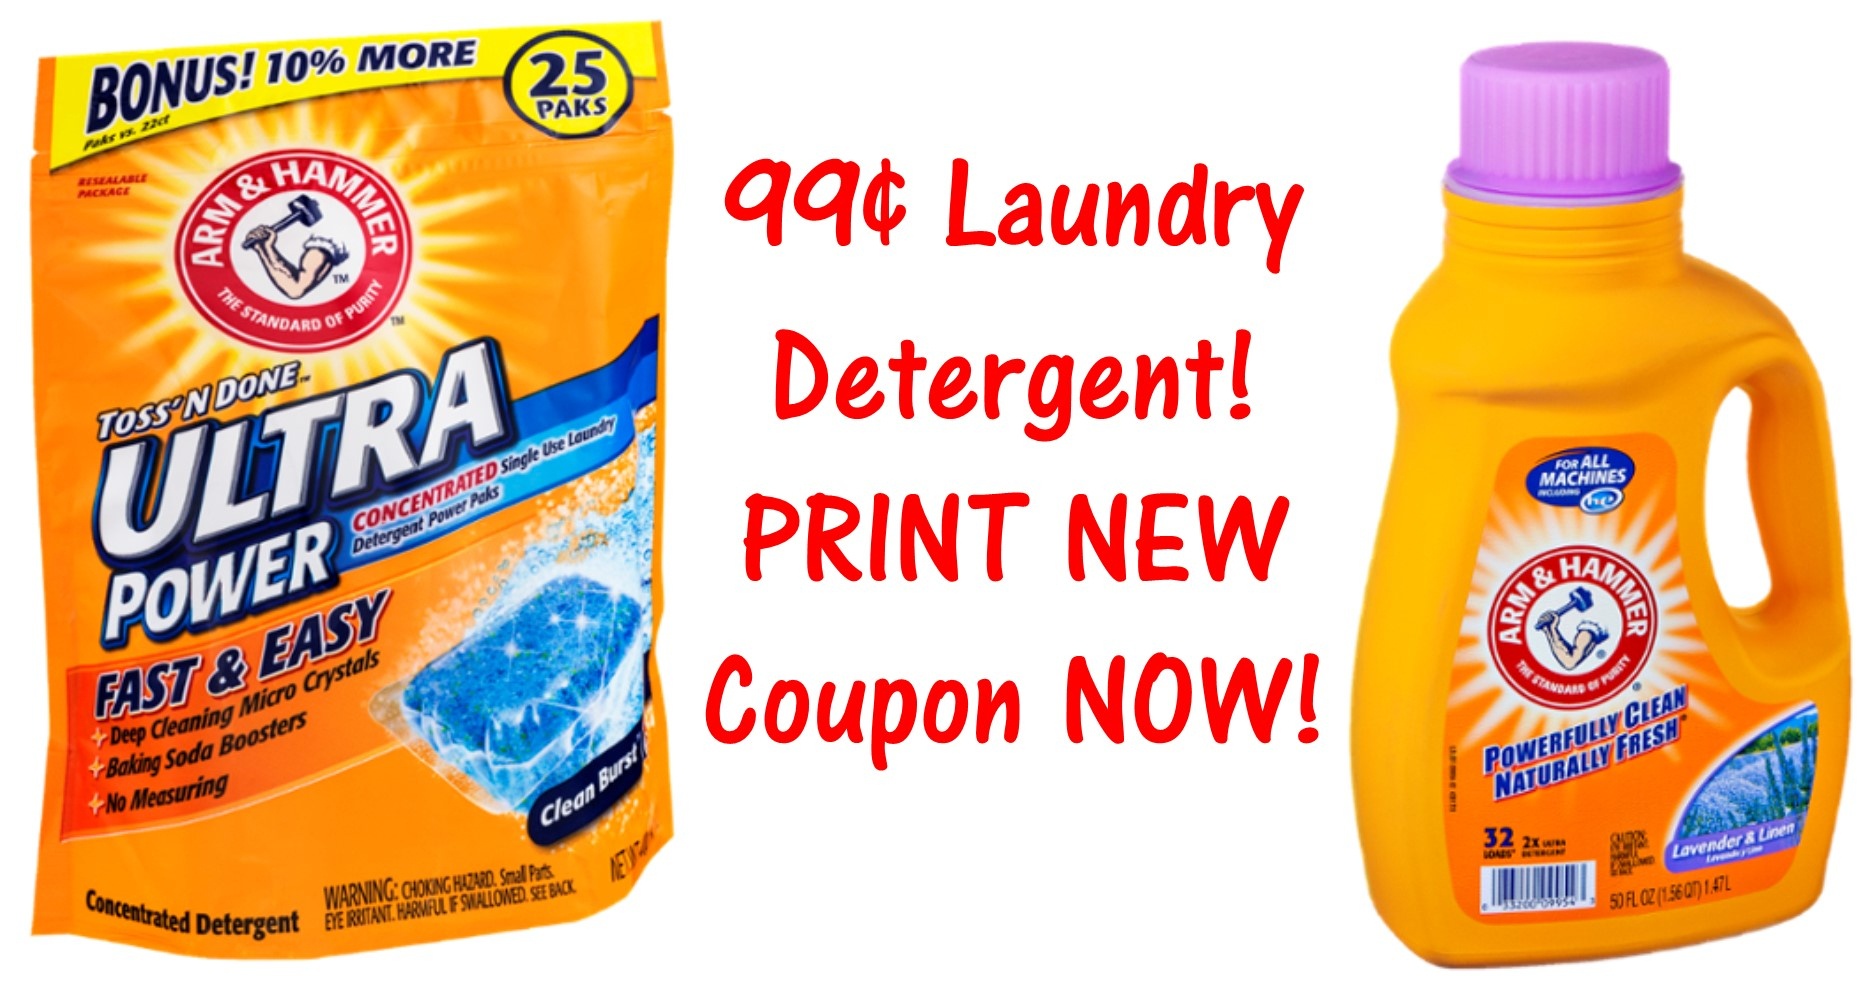 New Arm &amp;amp; Hammer Printable Coupons = $0.99 Laundry Detergent! - Free Printable Coupons For Arm And Hammer Laundry Detergent